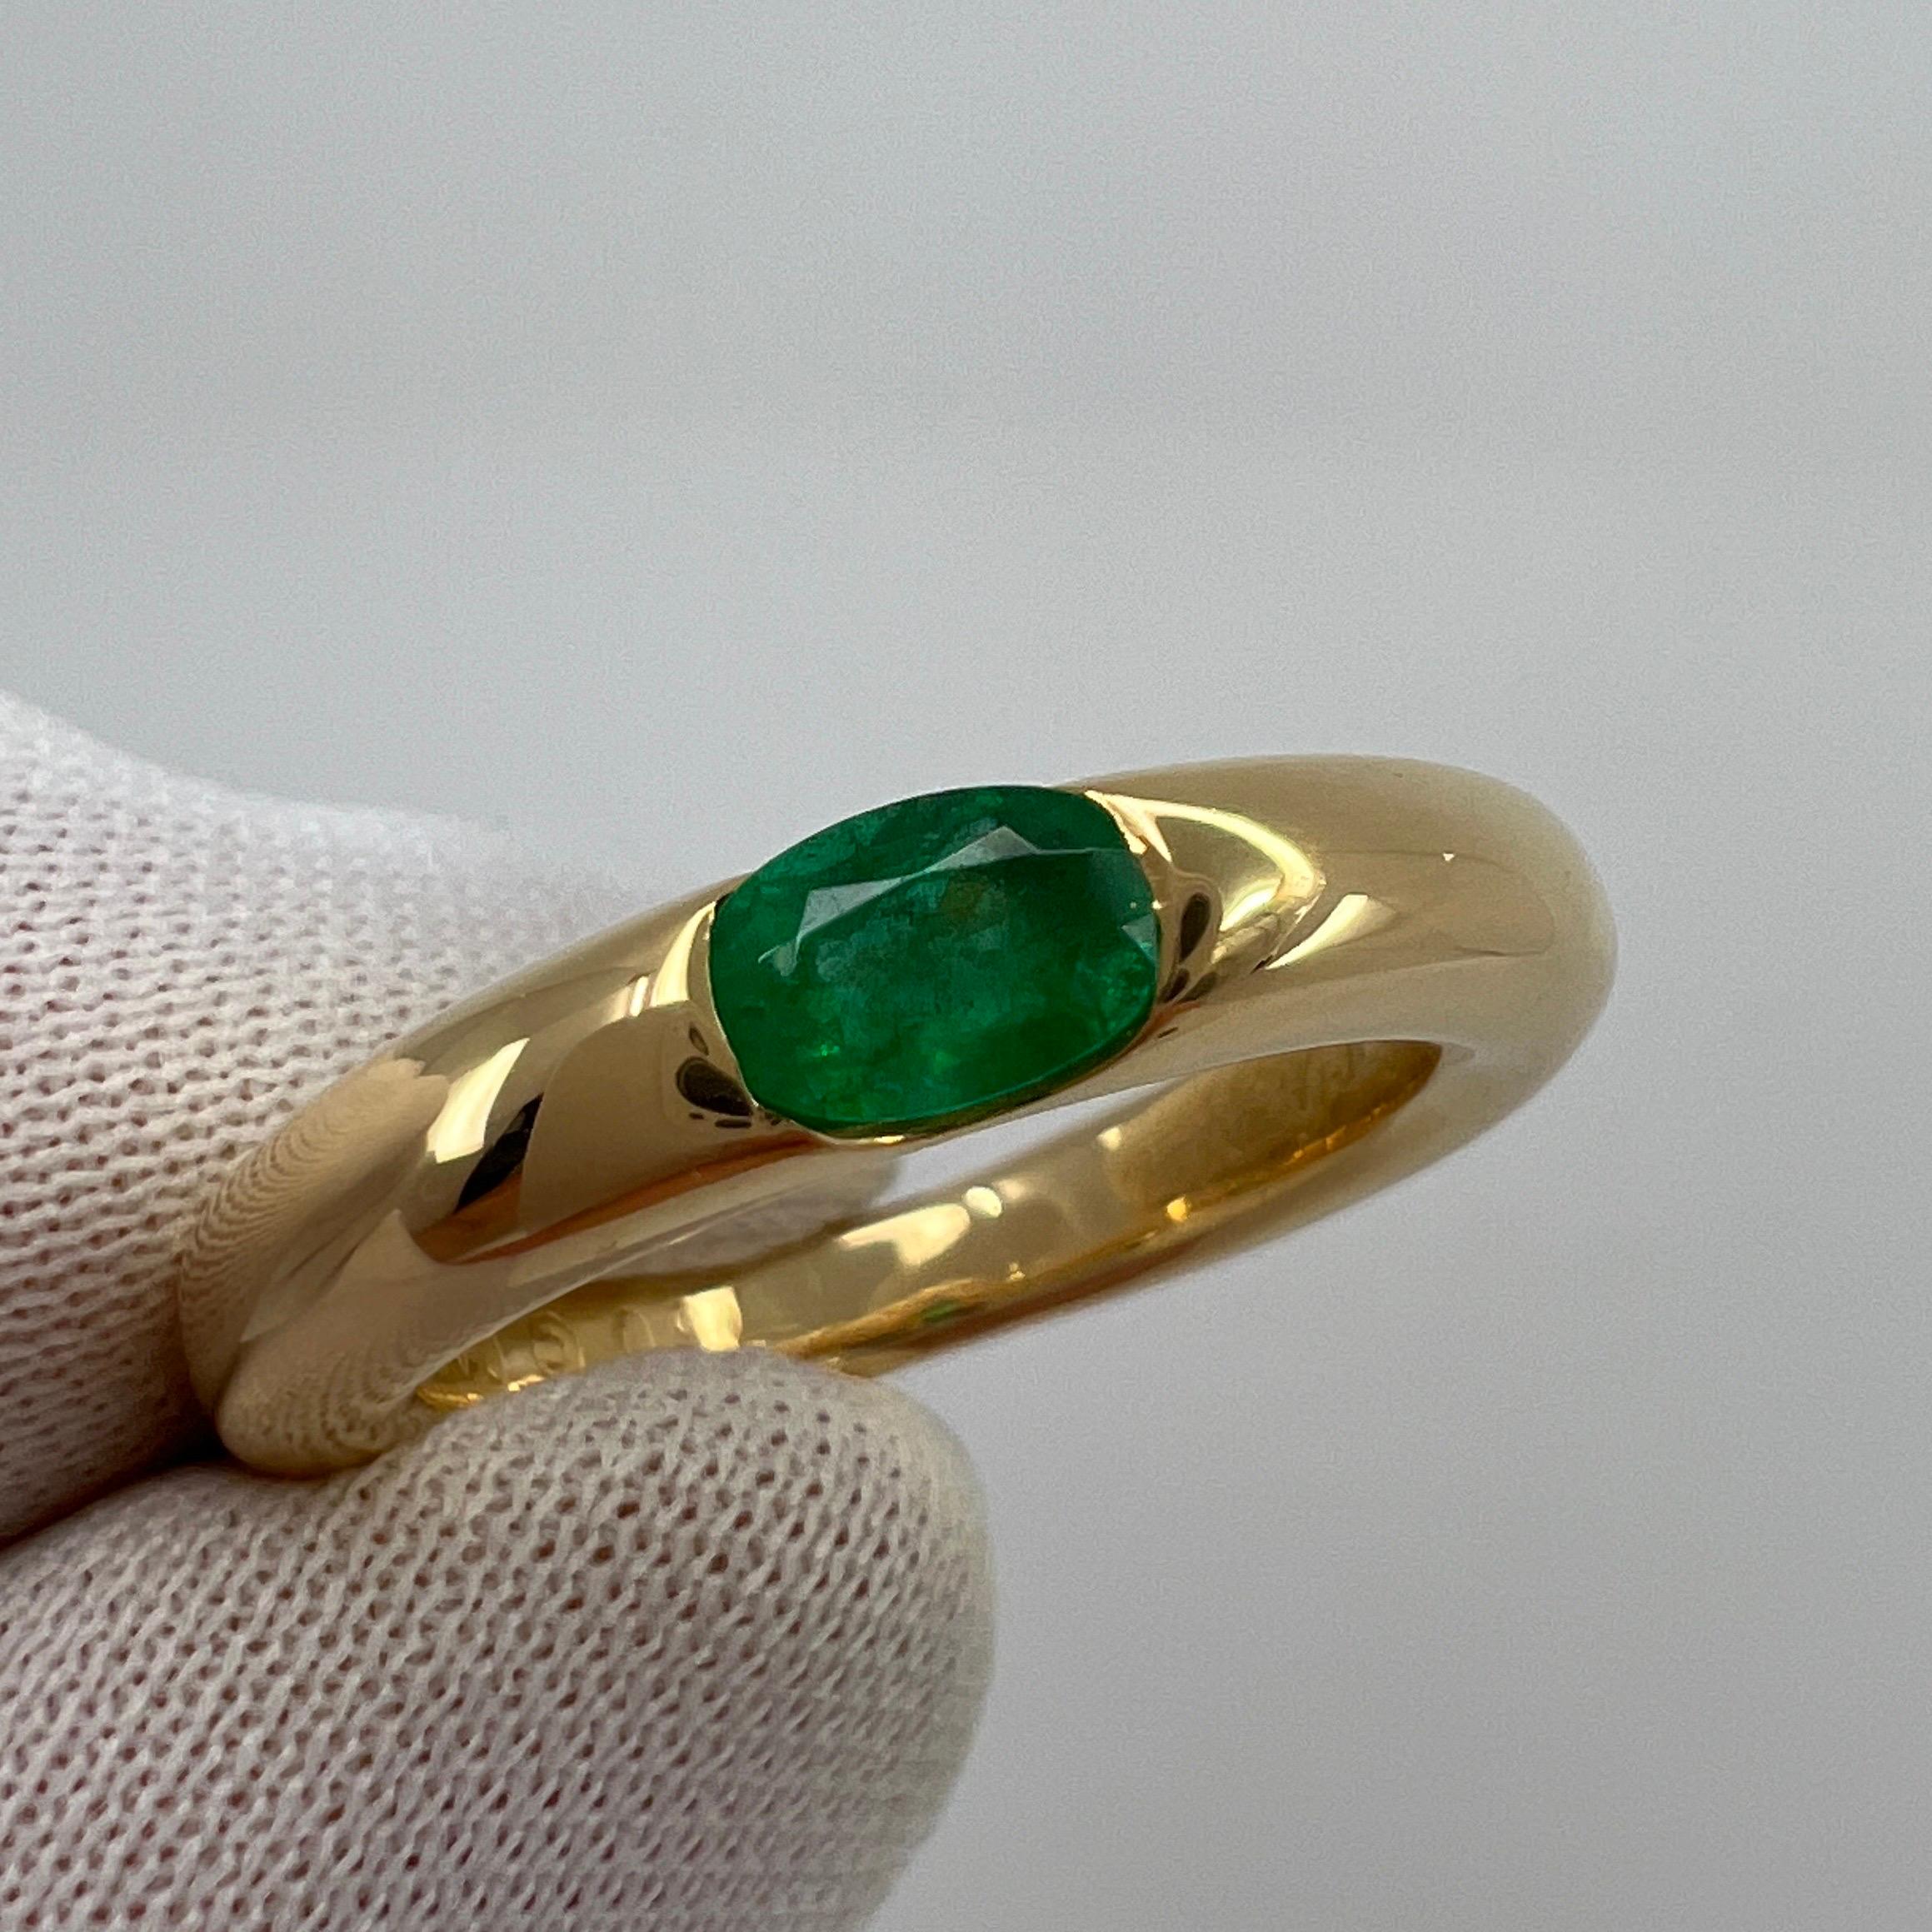 Vintage Cartier Emerald Vivid Green Ellipse 18k Yellow Gold Solitaire Ring 52 6 1